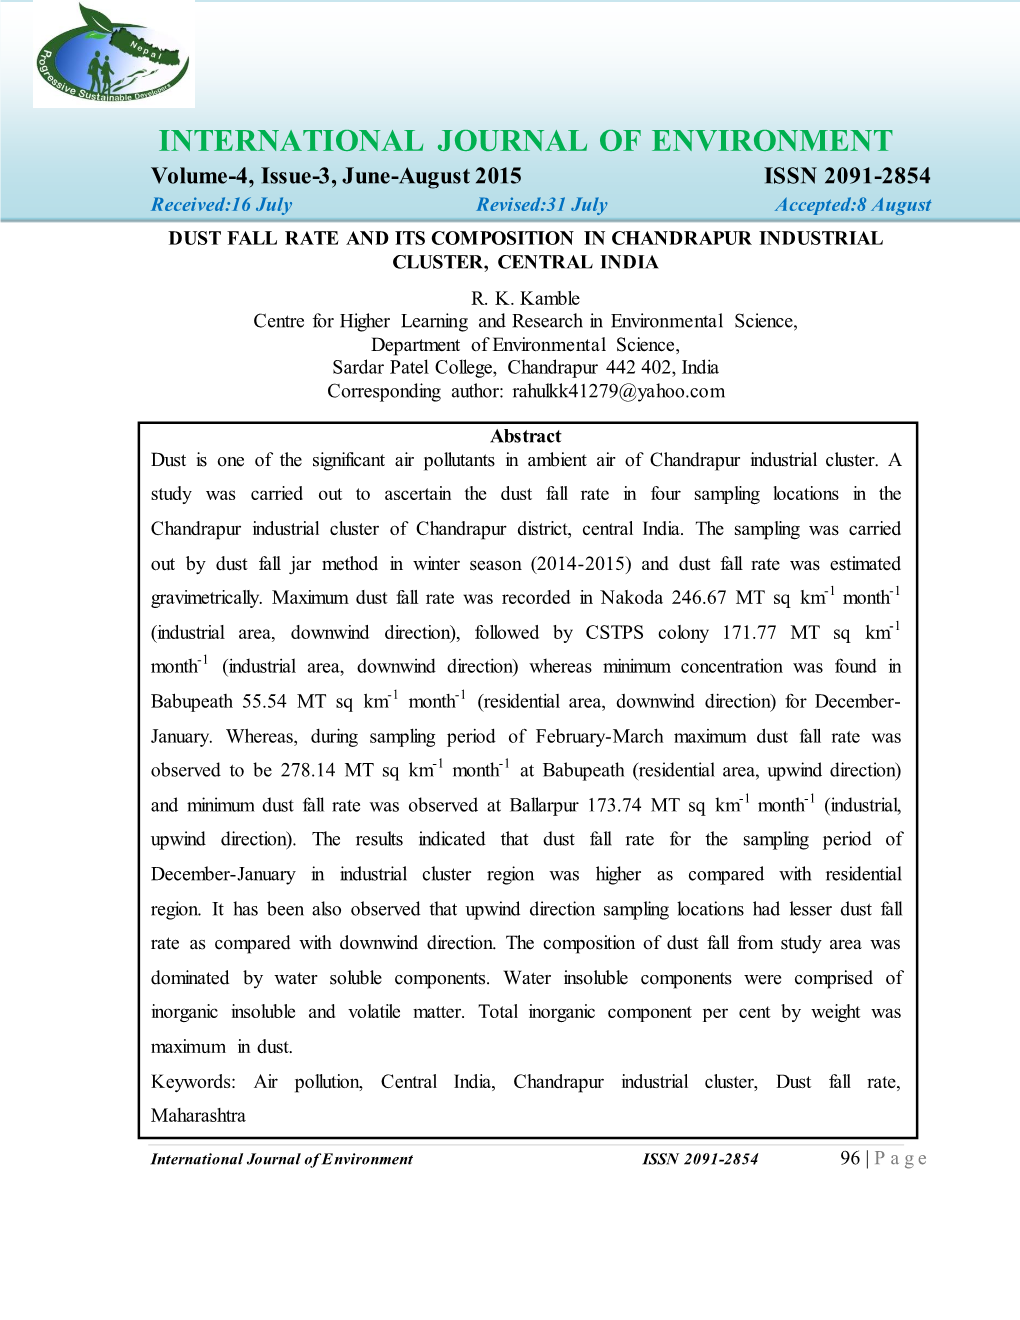 INTERNATIONAL JOURNAL of ENVIRONMENT Volume-4, Issue-3, June-August 2015 ISSN 2091-2854 Received:16 July Revised:31 July Accepted:8 August